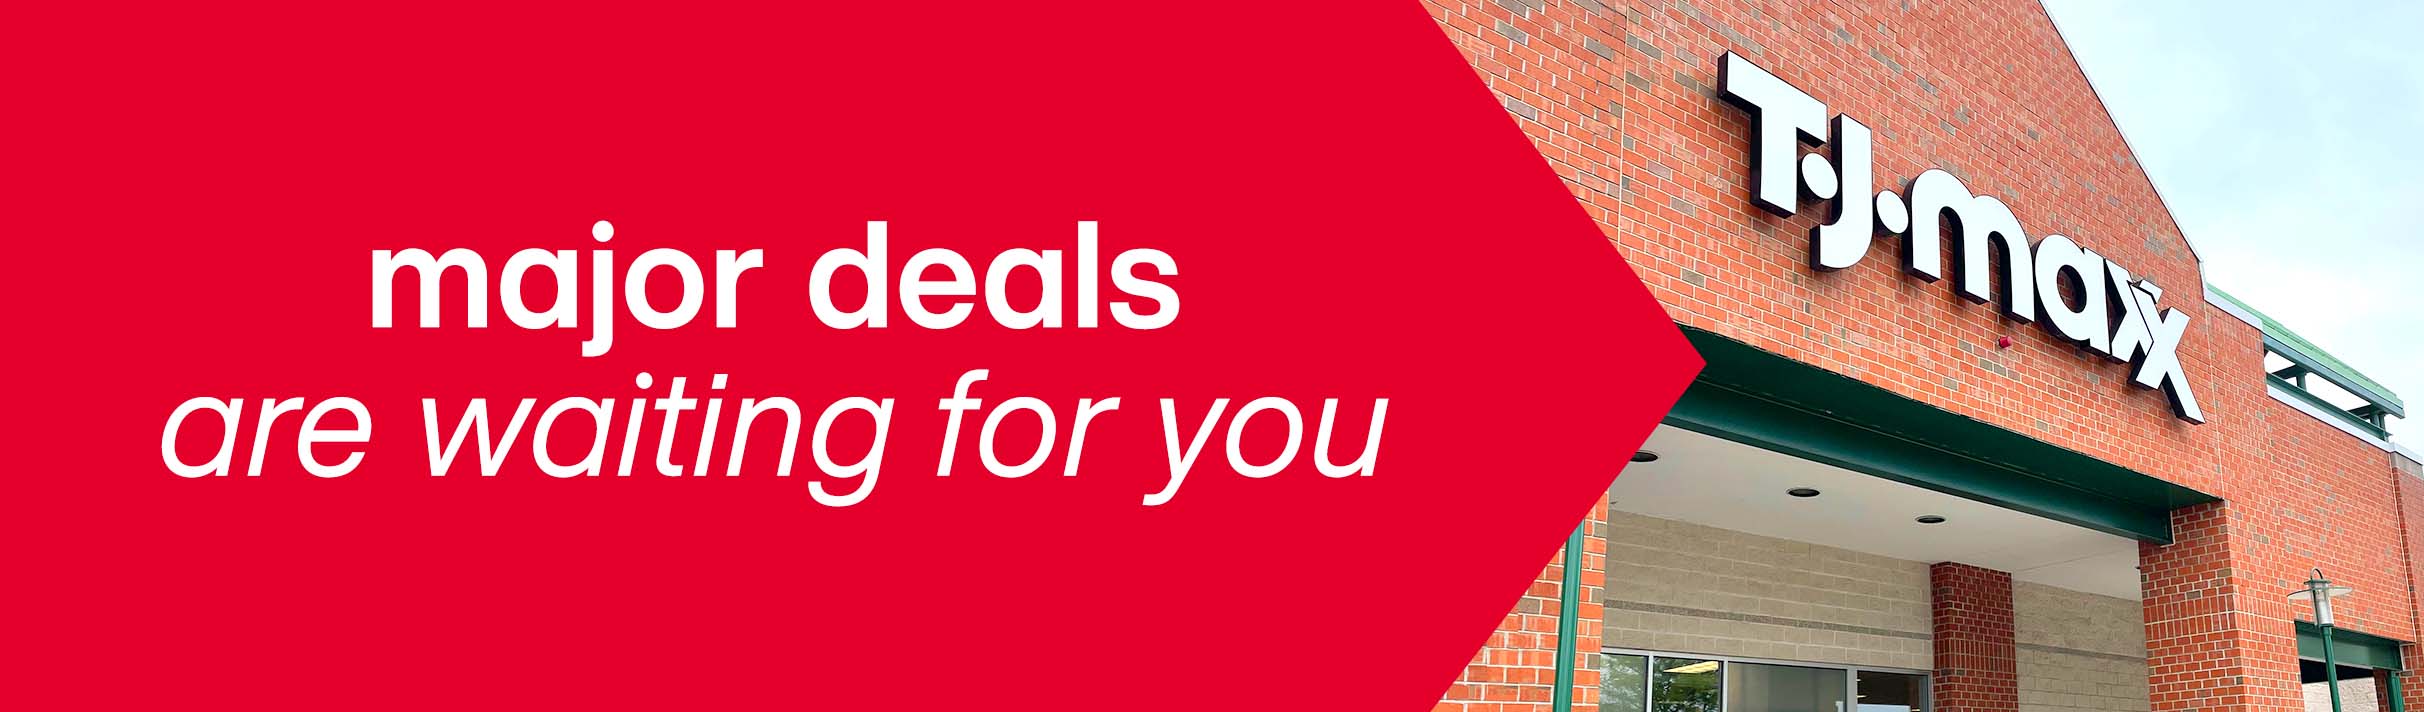 Major deals are waiting for you